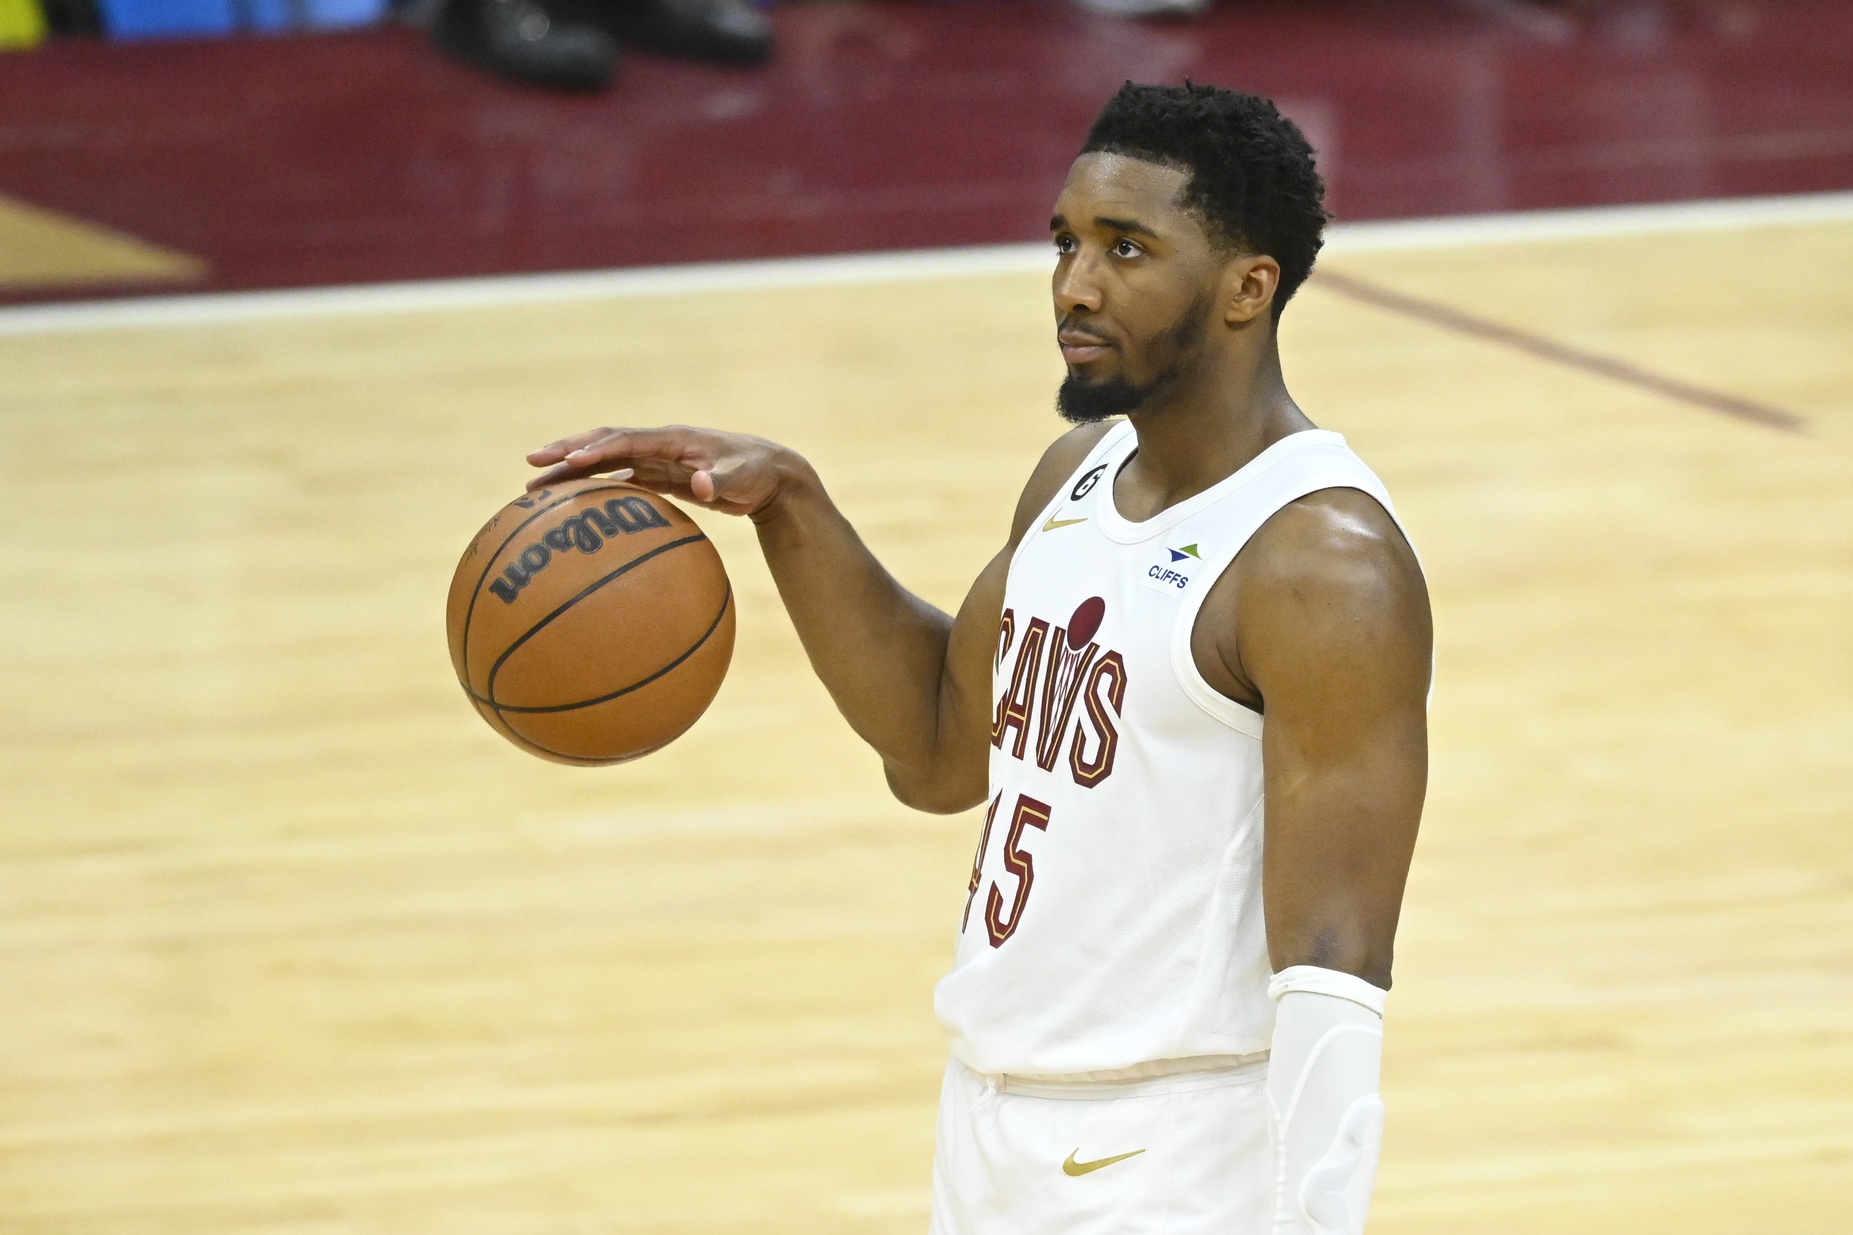 Apr 26, 2023; Cleveland, Ohio, USA; Cleveland Cavaliers guard Donovan Mitchell (45) dribbles out the clock in the fourth quarter during game five of the 2023 NBA playoffs against the New York Knicks at Rocket Mortgage FieldHouse. Mandatory Credit: David Richard-USA TODAY Sports